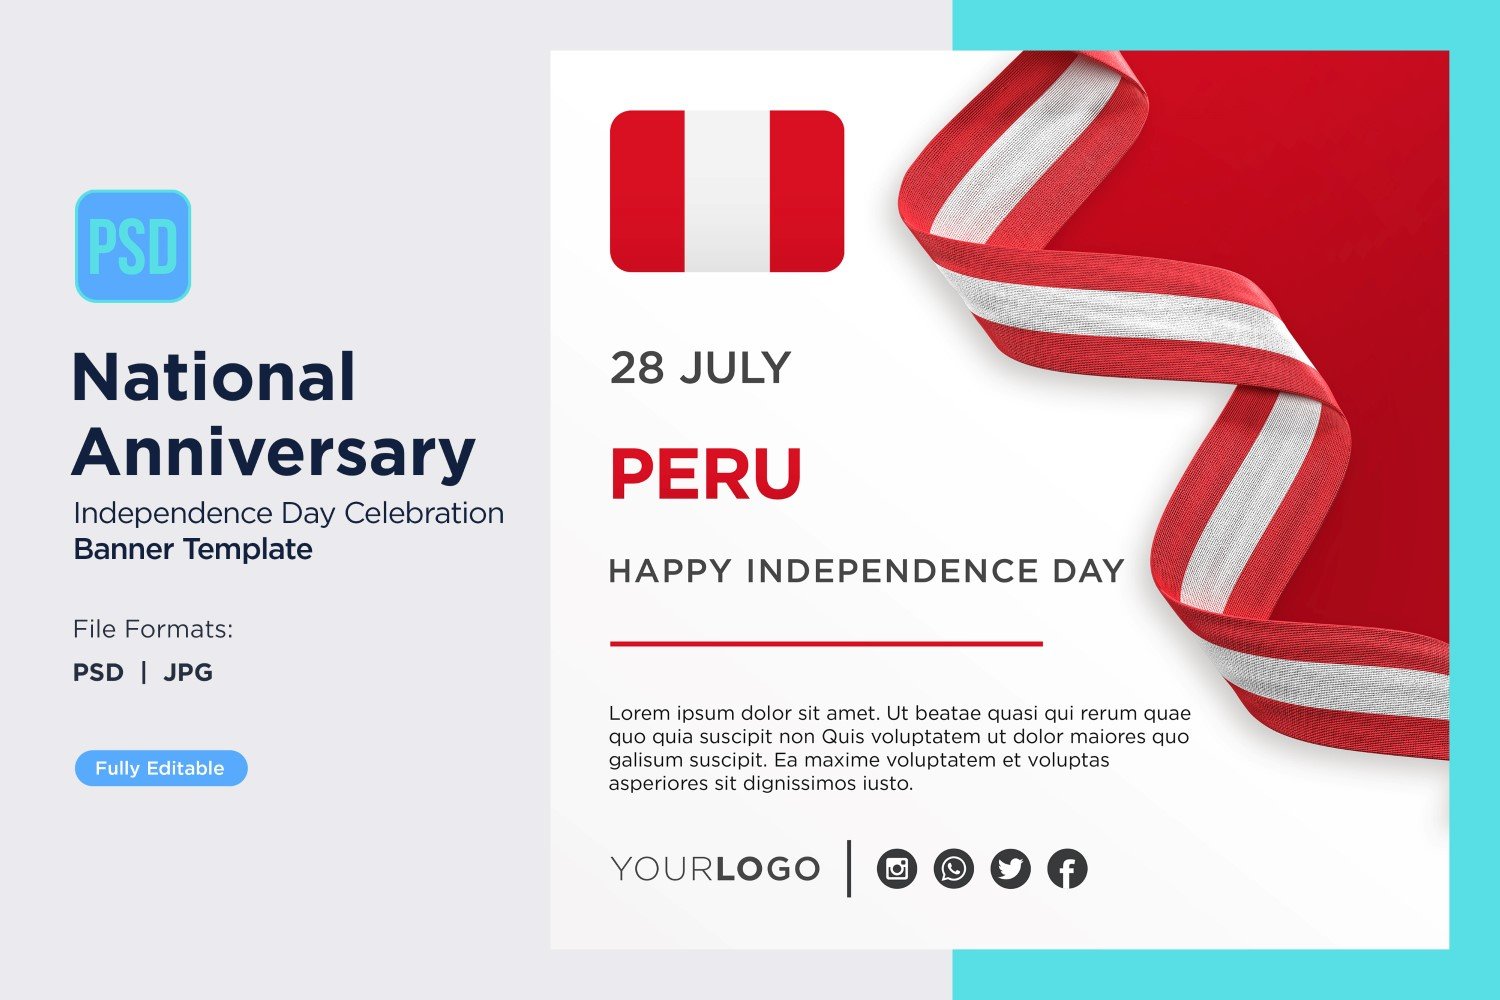 Template #402926 Day Celebration Webdesign Template - Logo template Preview